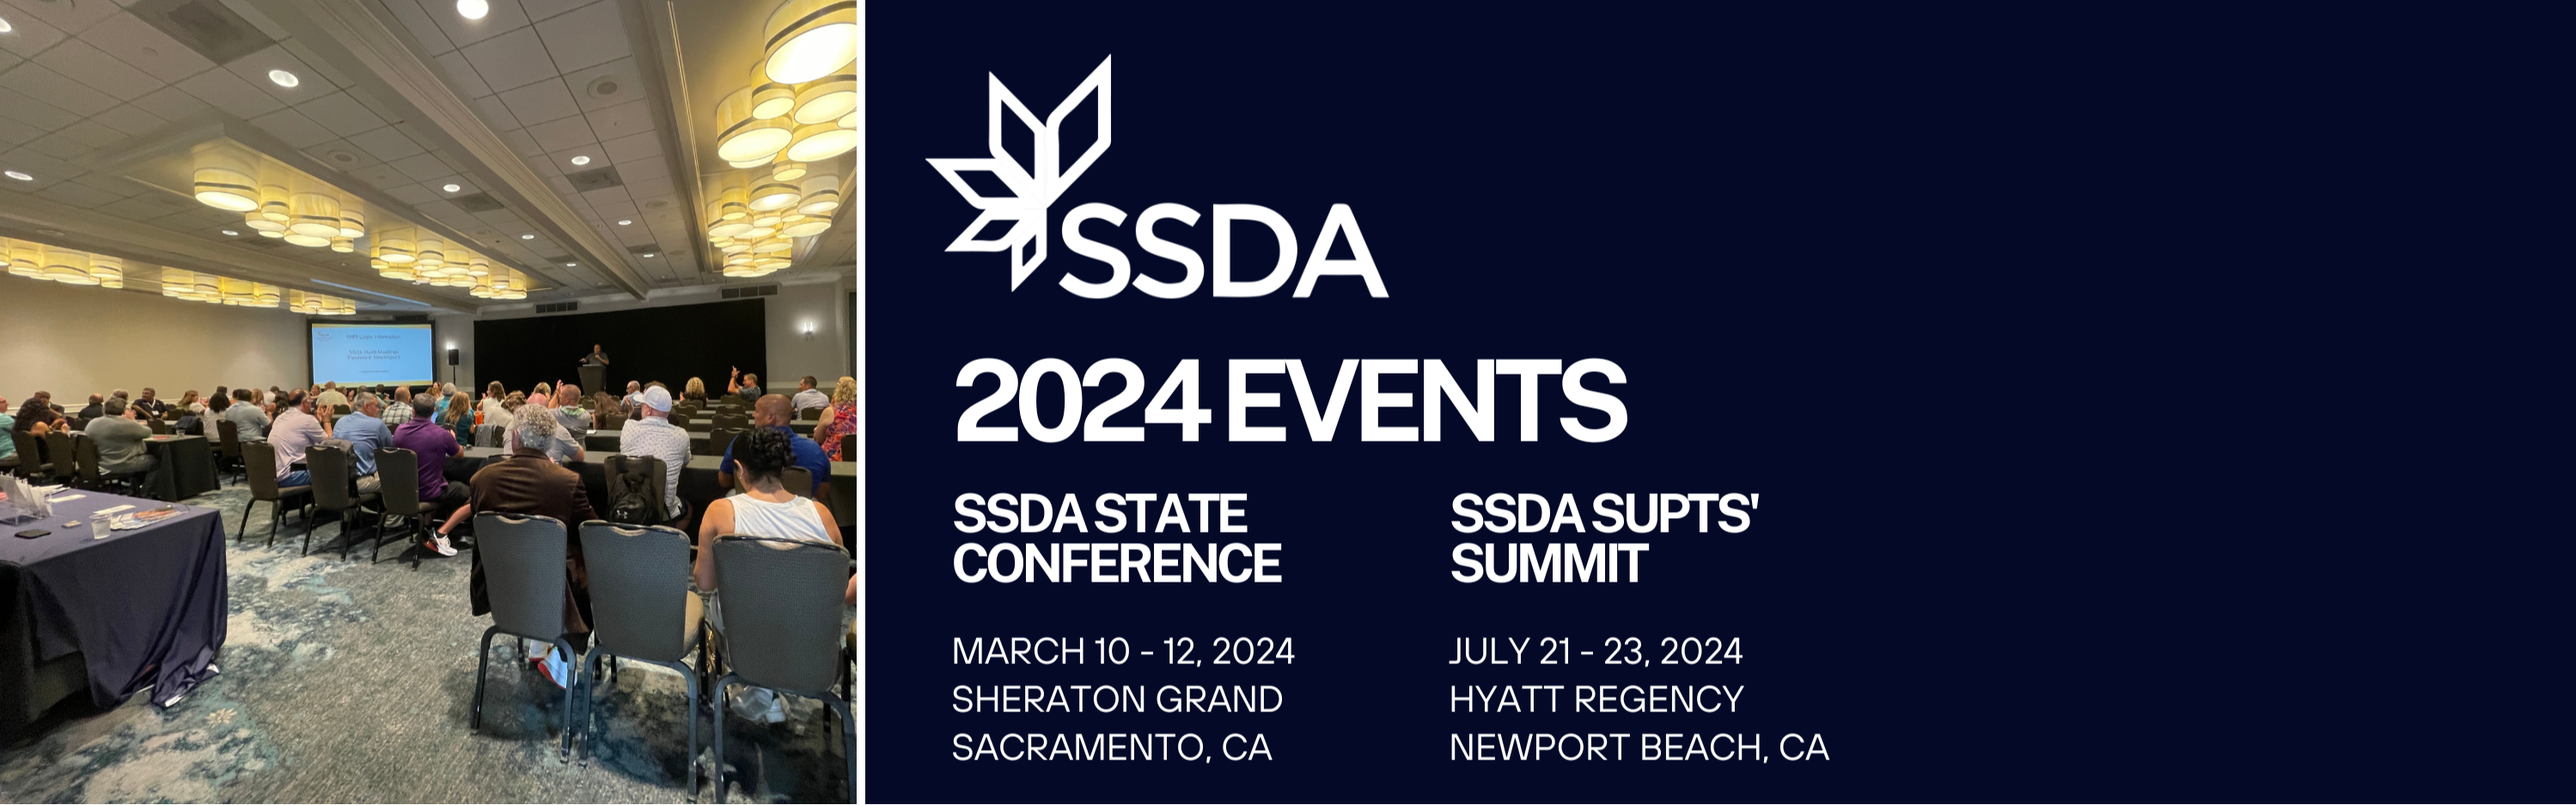 SSDA upcoming events gallery image